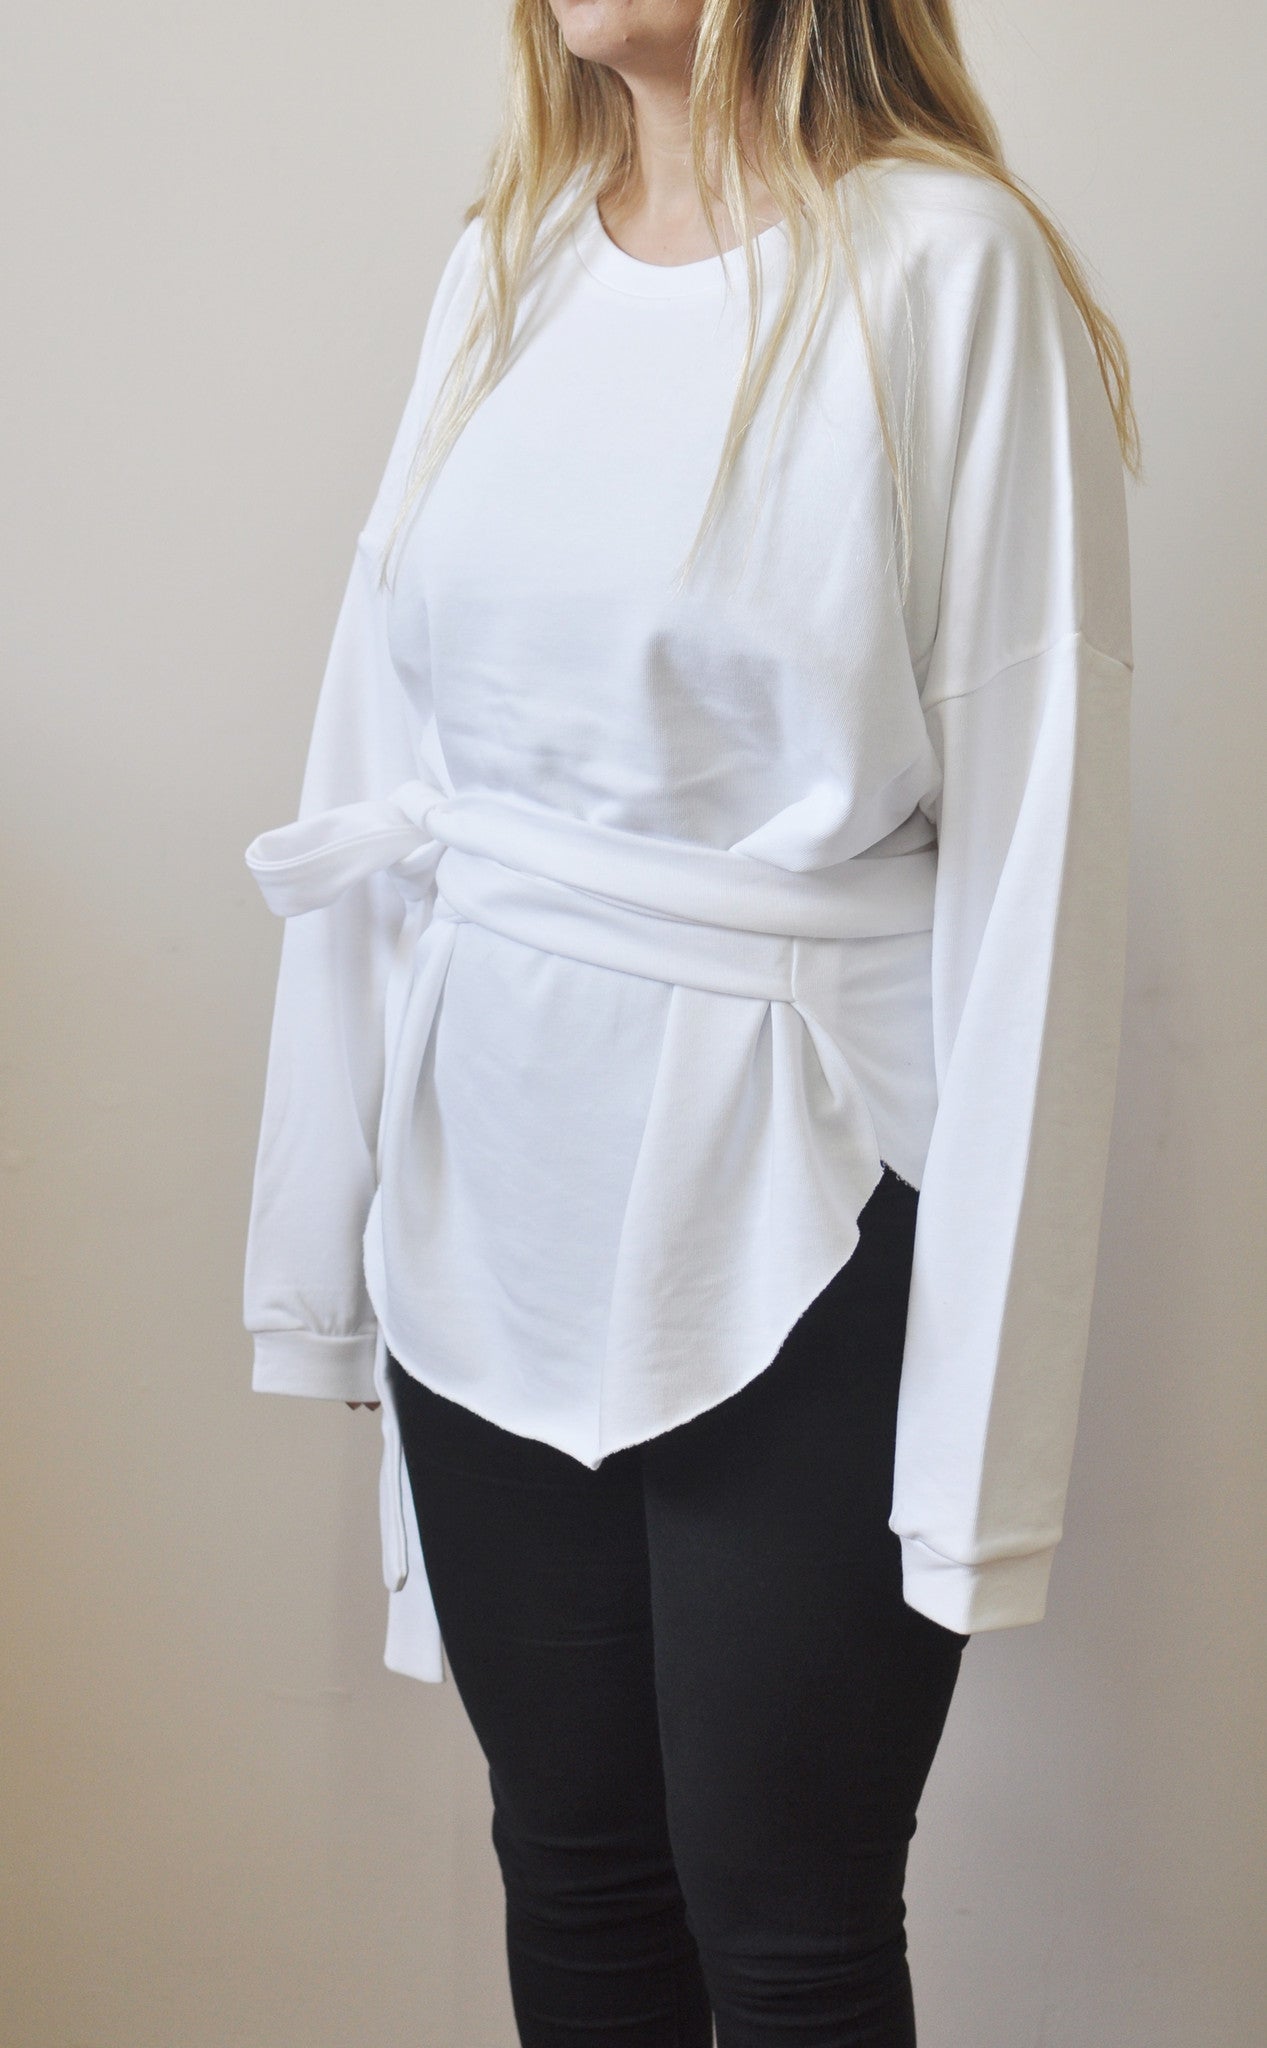 Asymmetric Knot Tie Around Waist Wrap Raw Oval Hem Sweatshirt in White / Overlong Sleeve Cut-out Accent